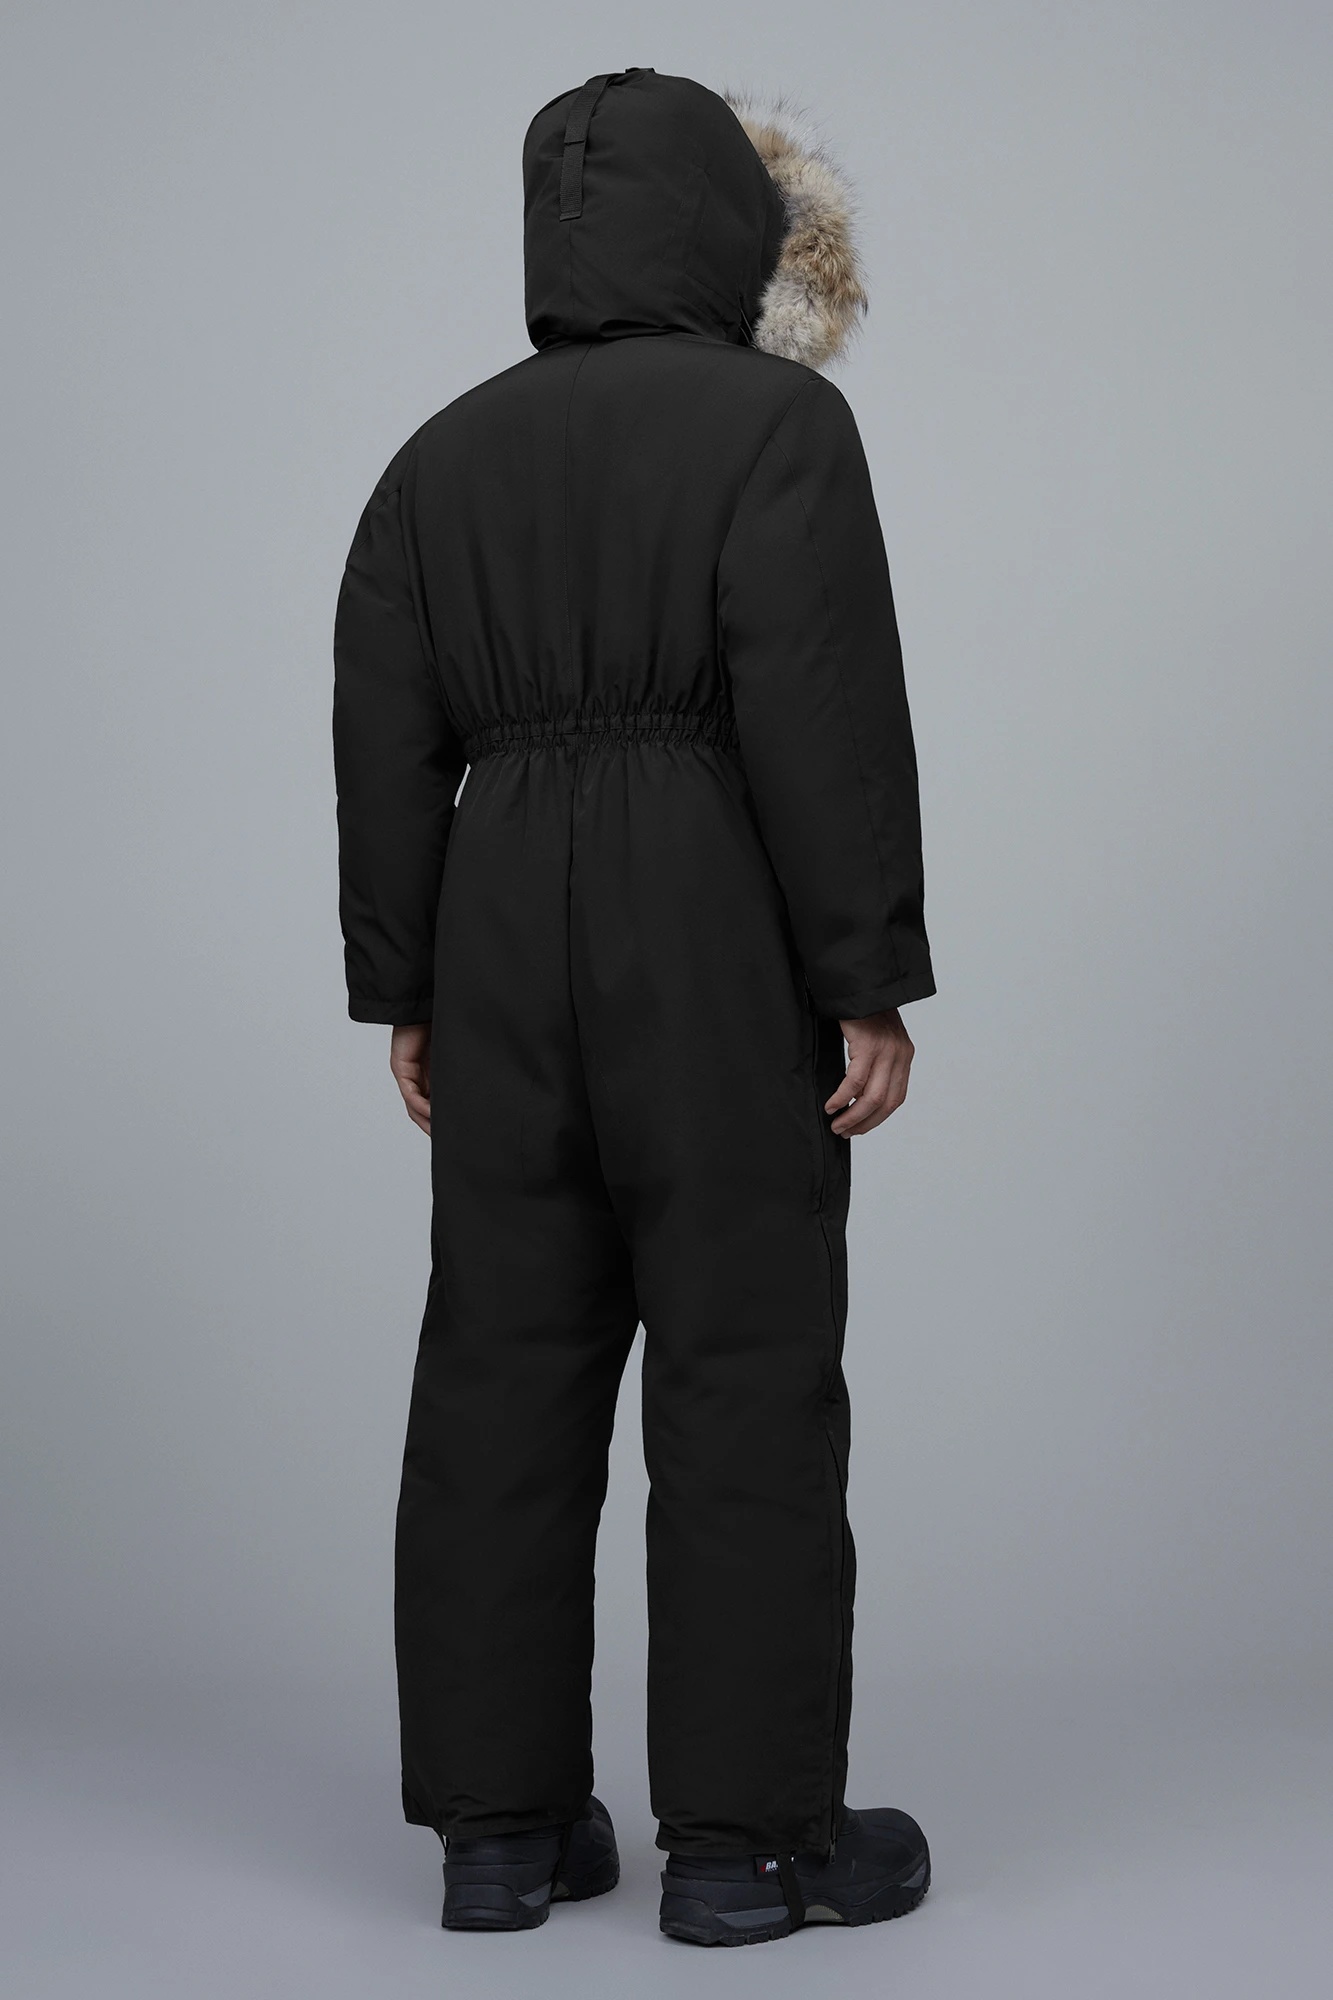 ARCTIC RIGGER COVERALL - 4